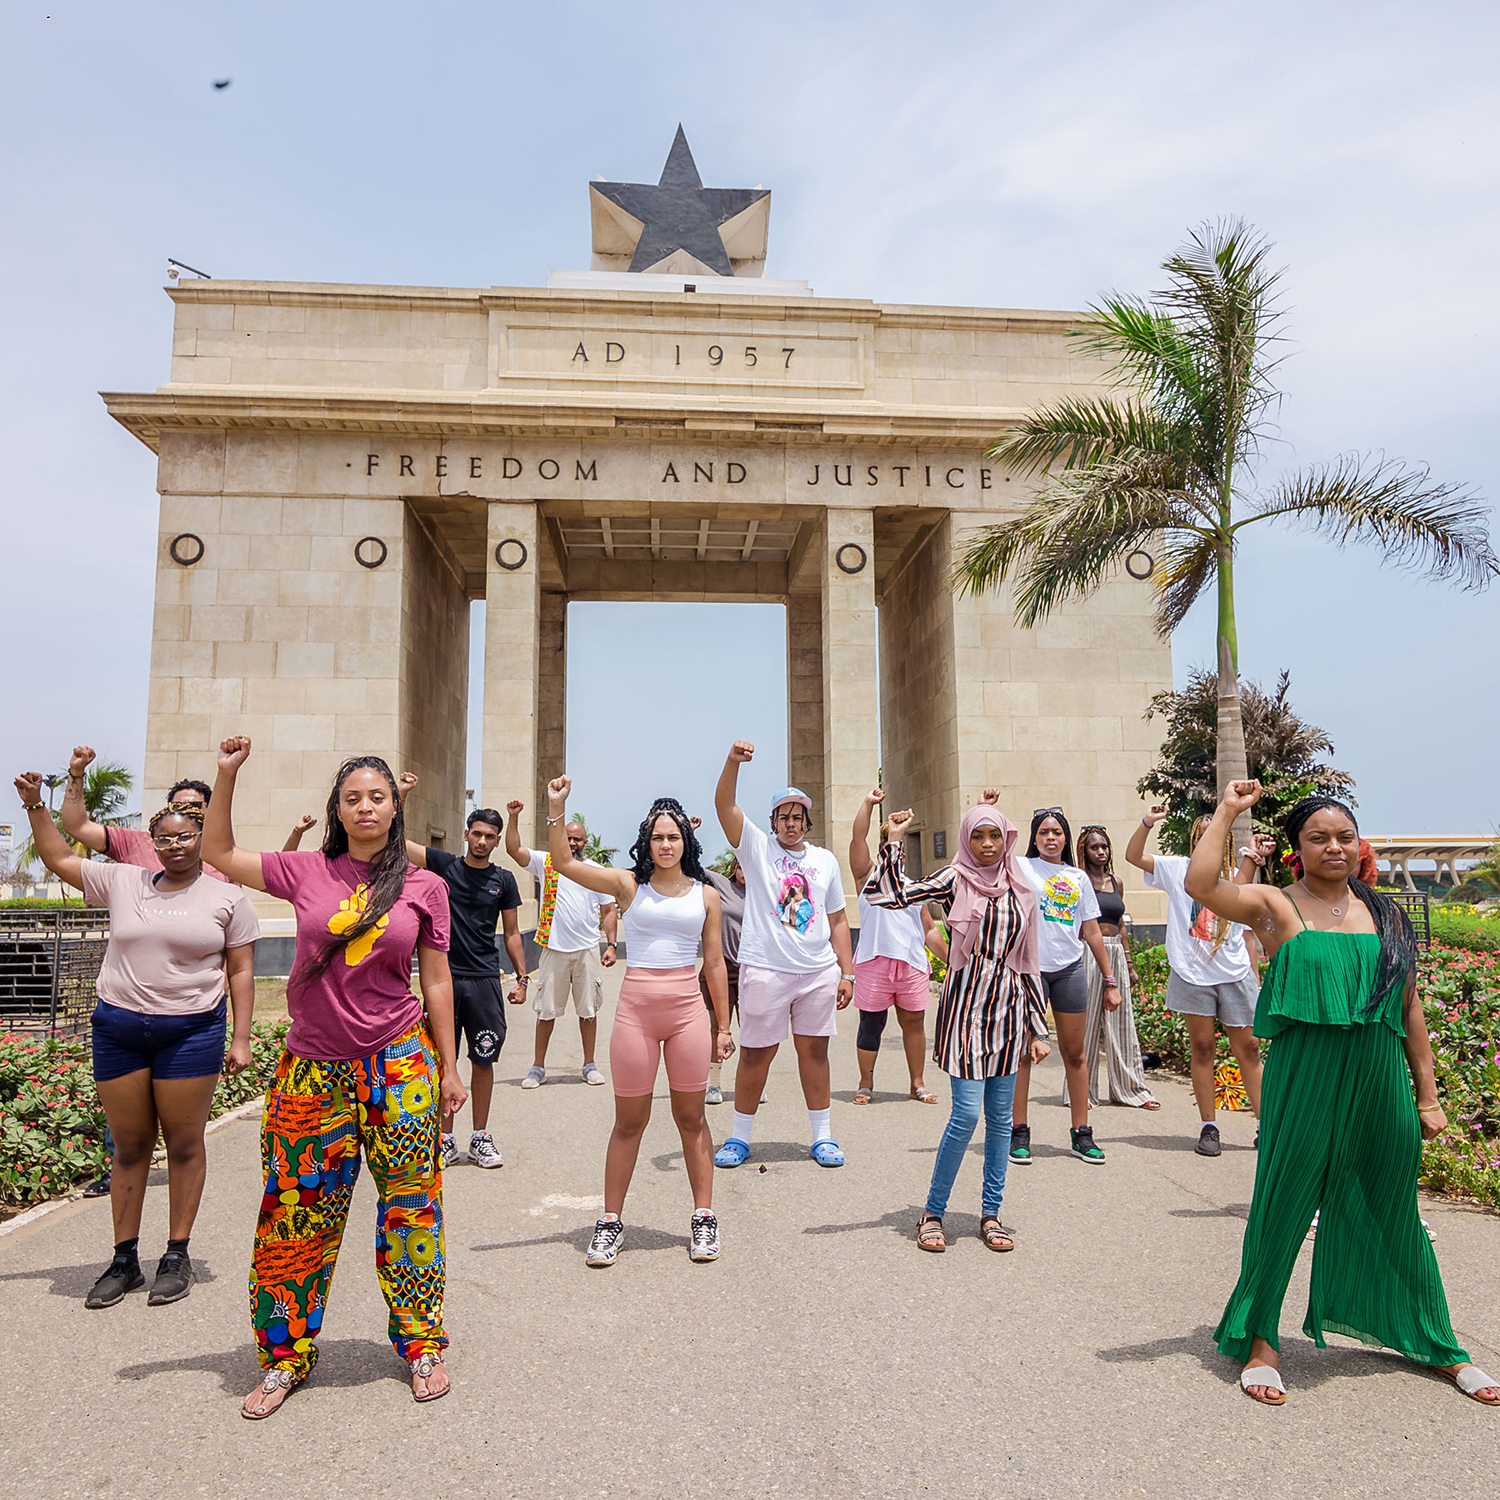 A diverse group of women stand with arms raised in front of a "Freedom and Justice" archway.